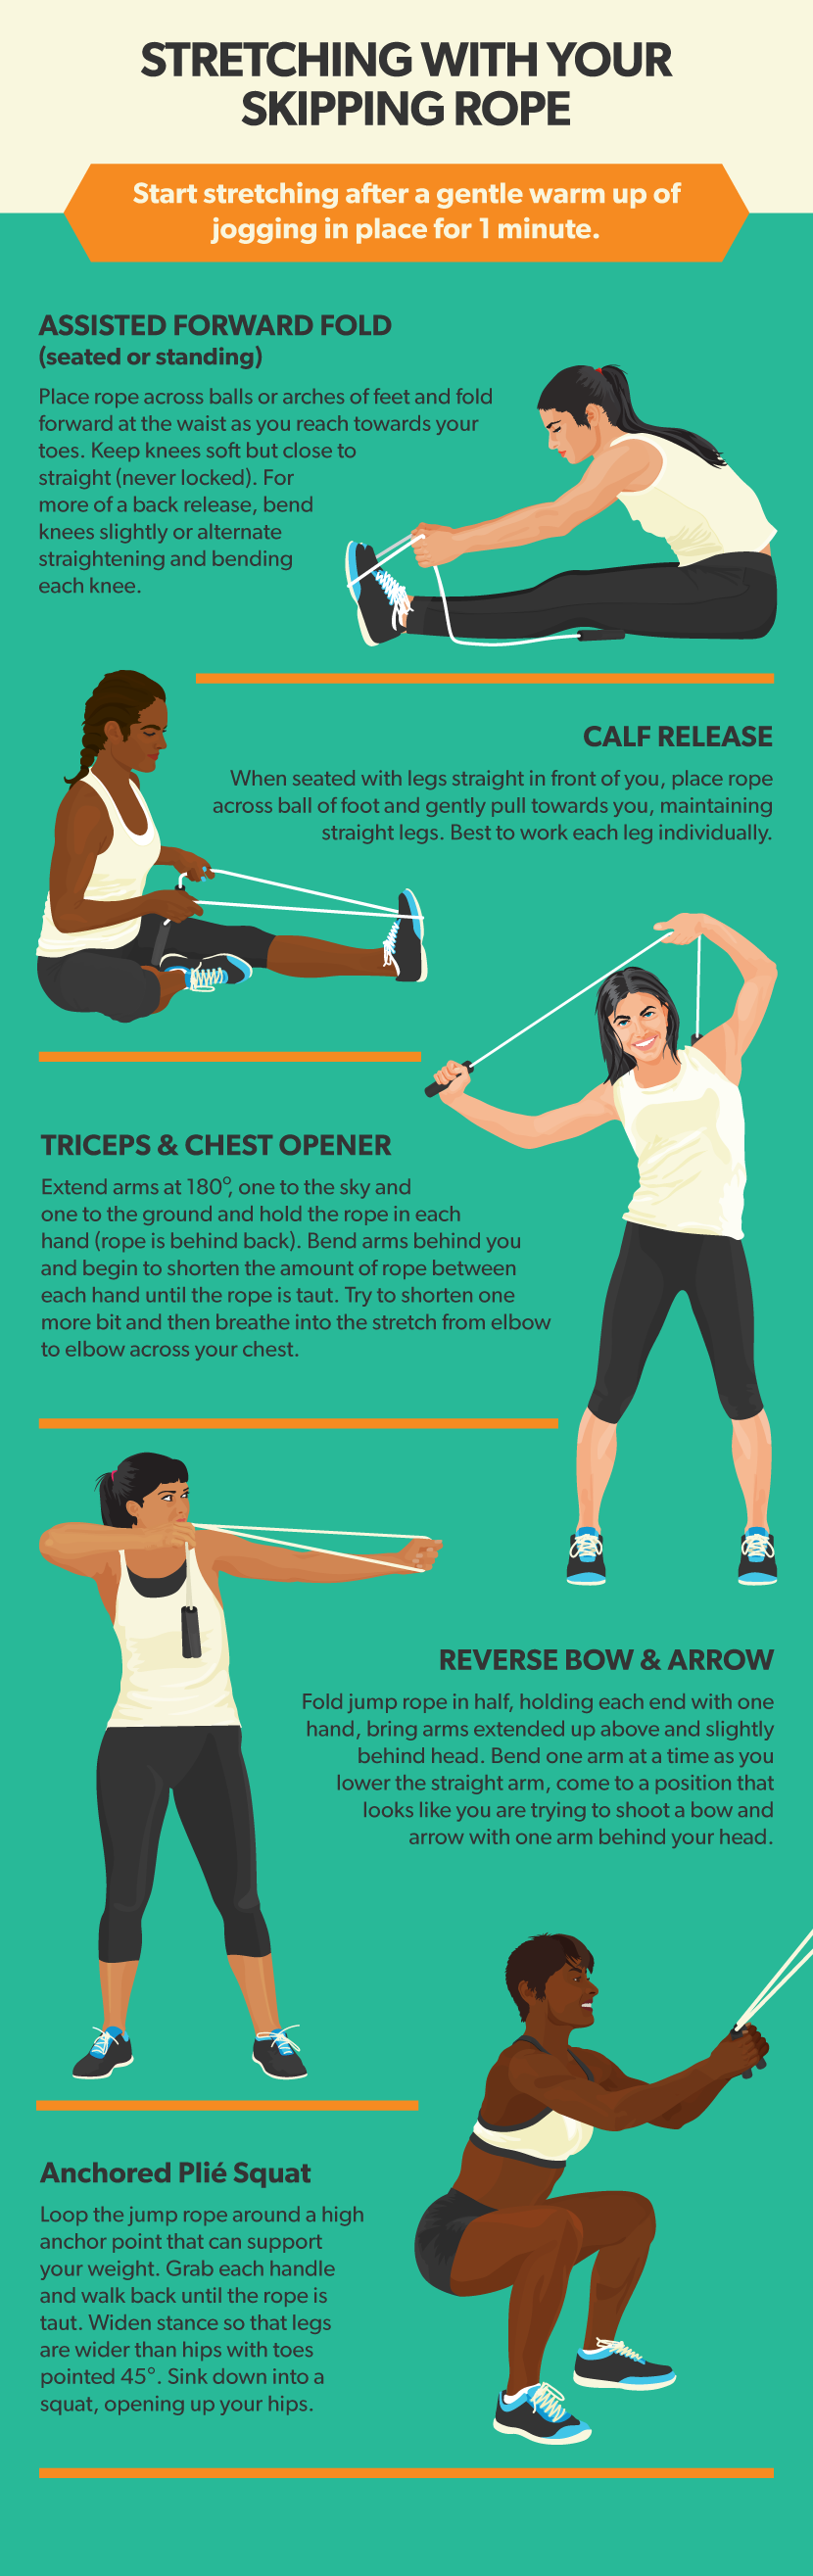 Stretching With Your Skipping Rope - Hop to it! A Guide to Exercising With a Jump Rope